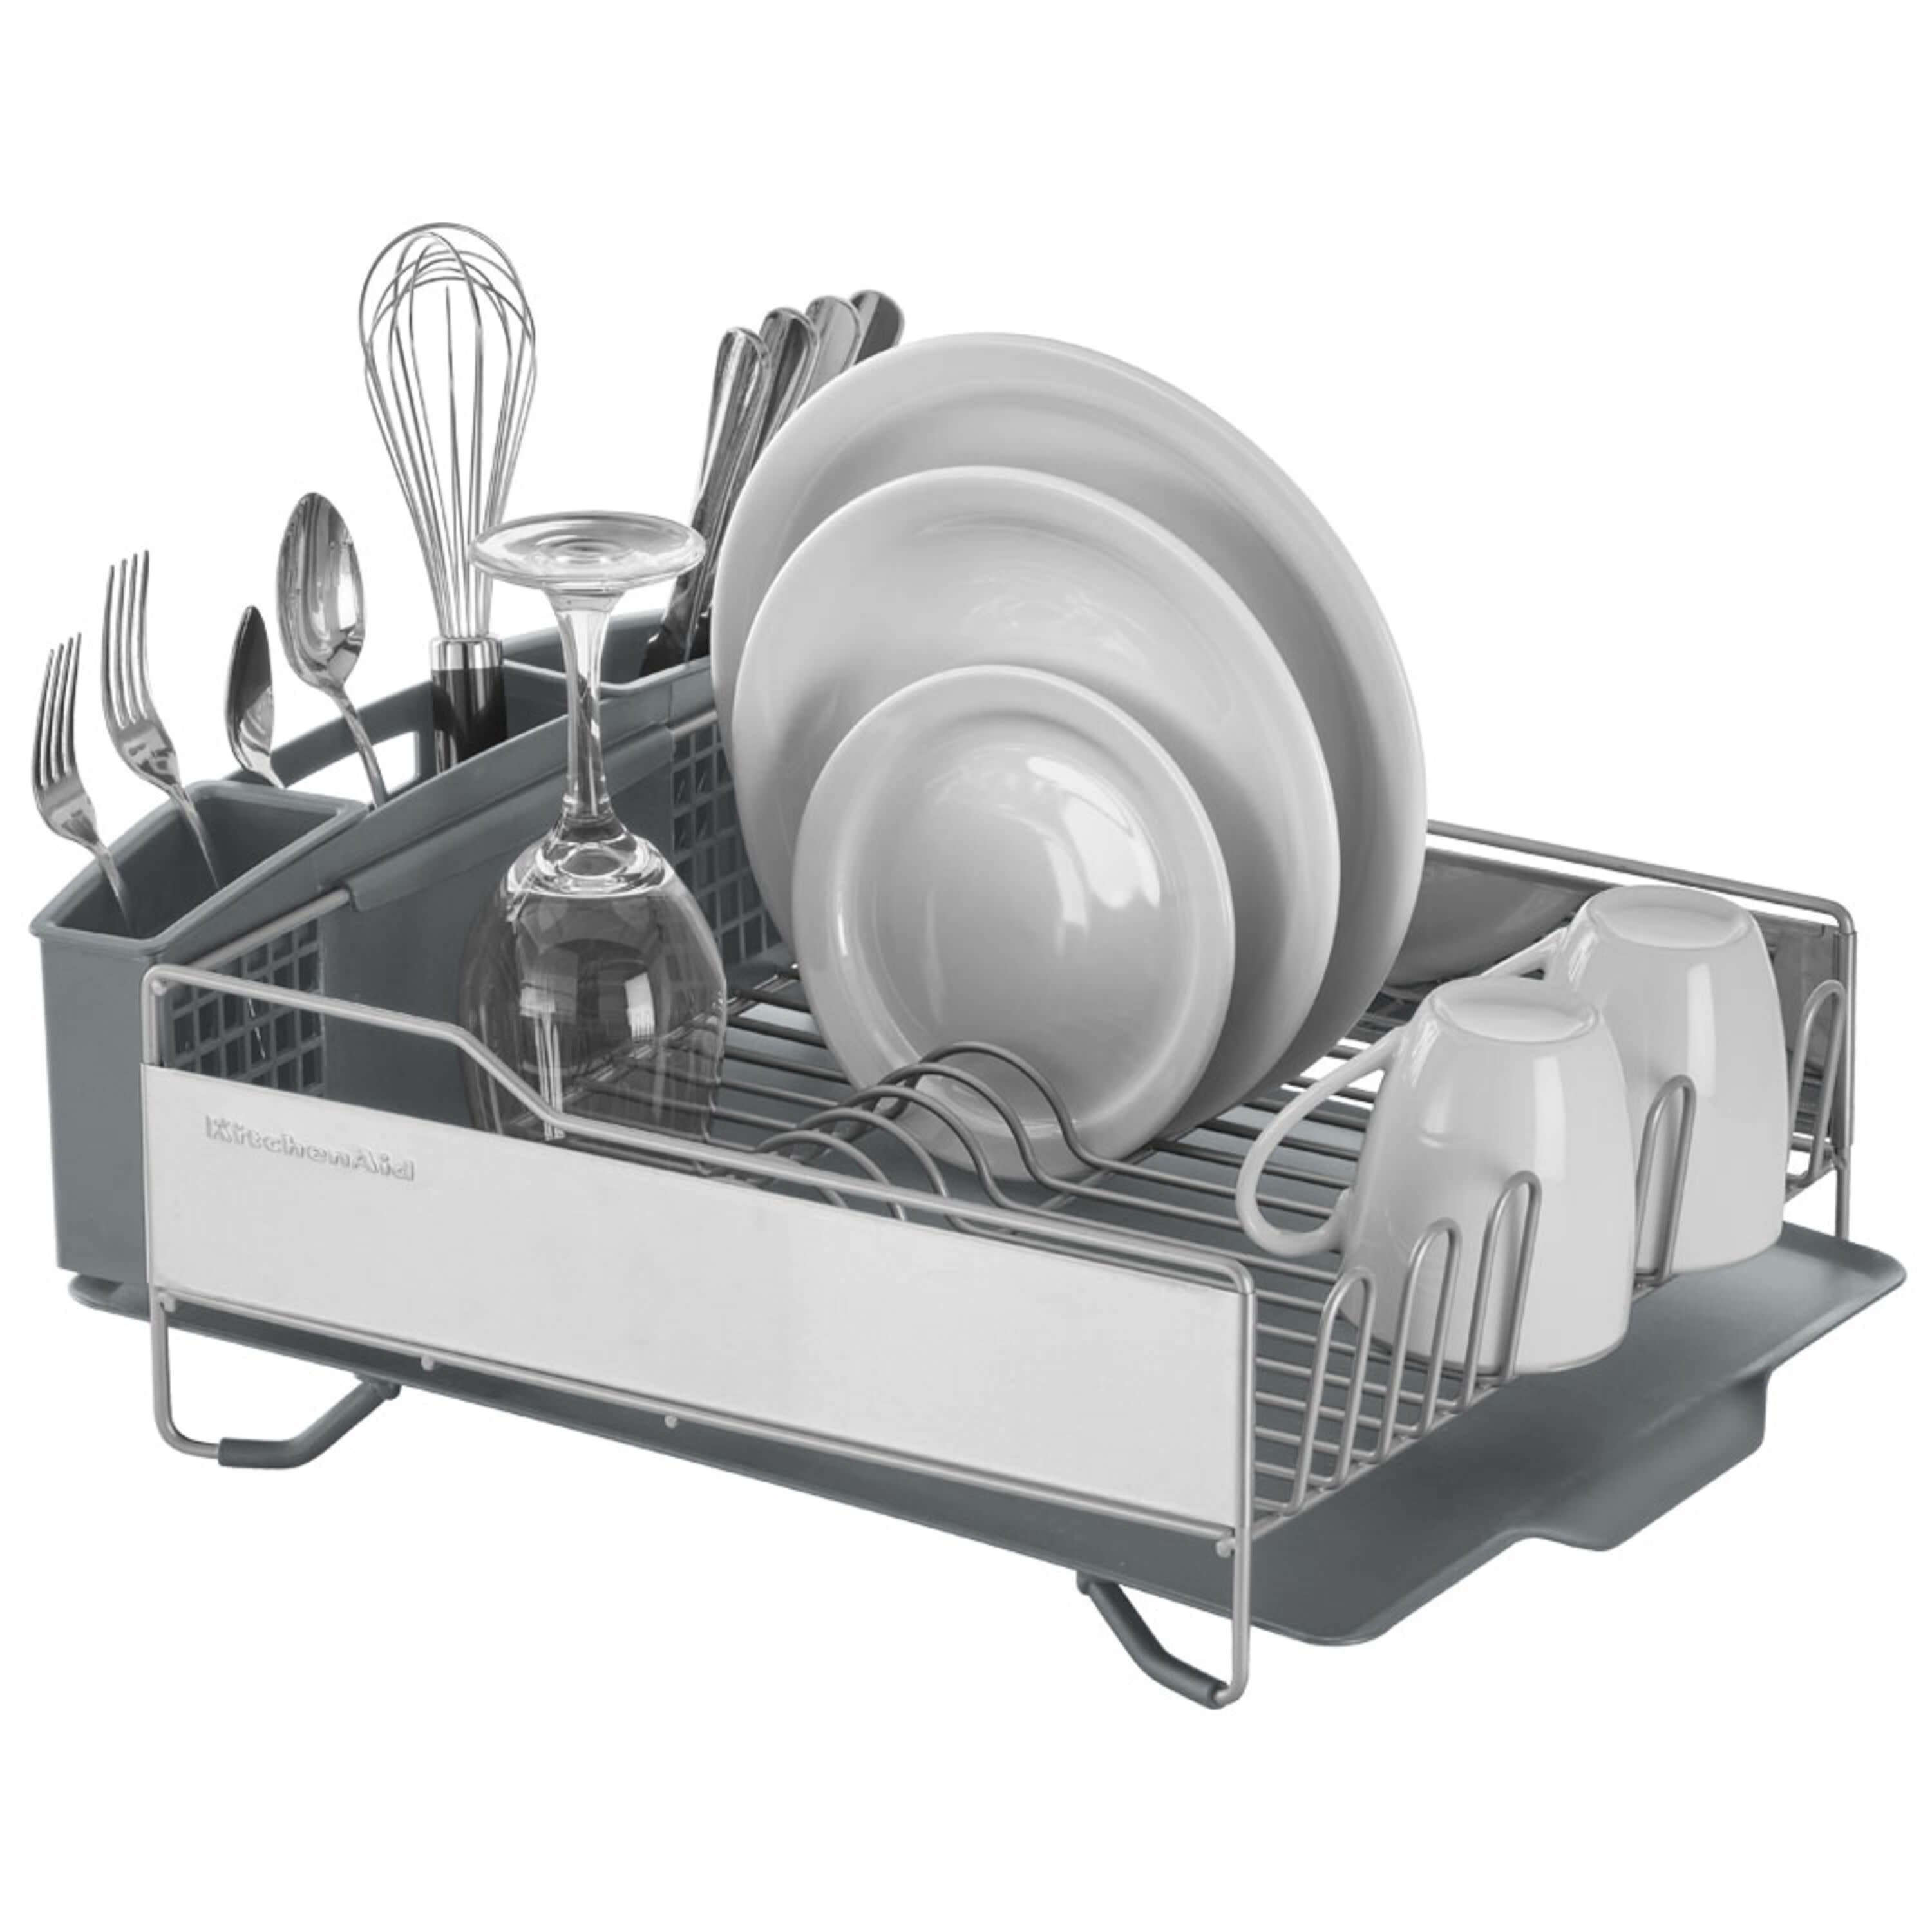 BRAND NEW KitchenAid Stainless Steel Dish Rack Price DROPPED FROM $60 to  $30